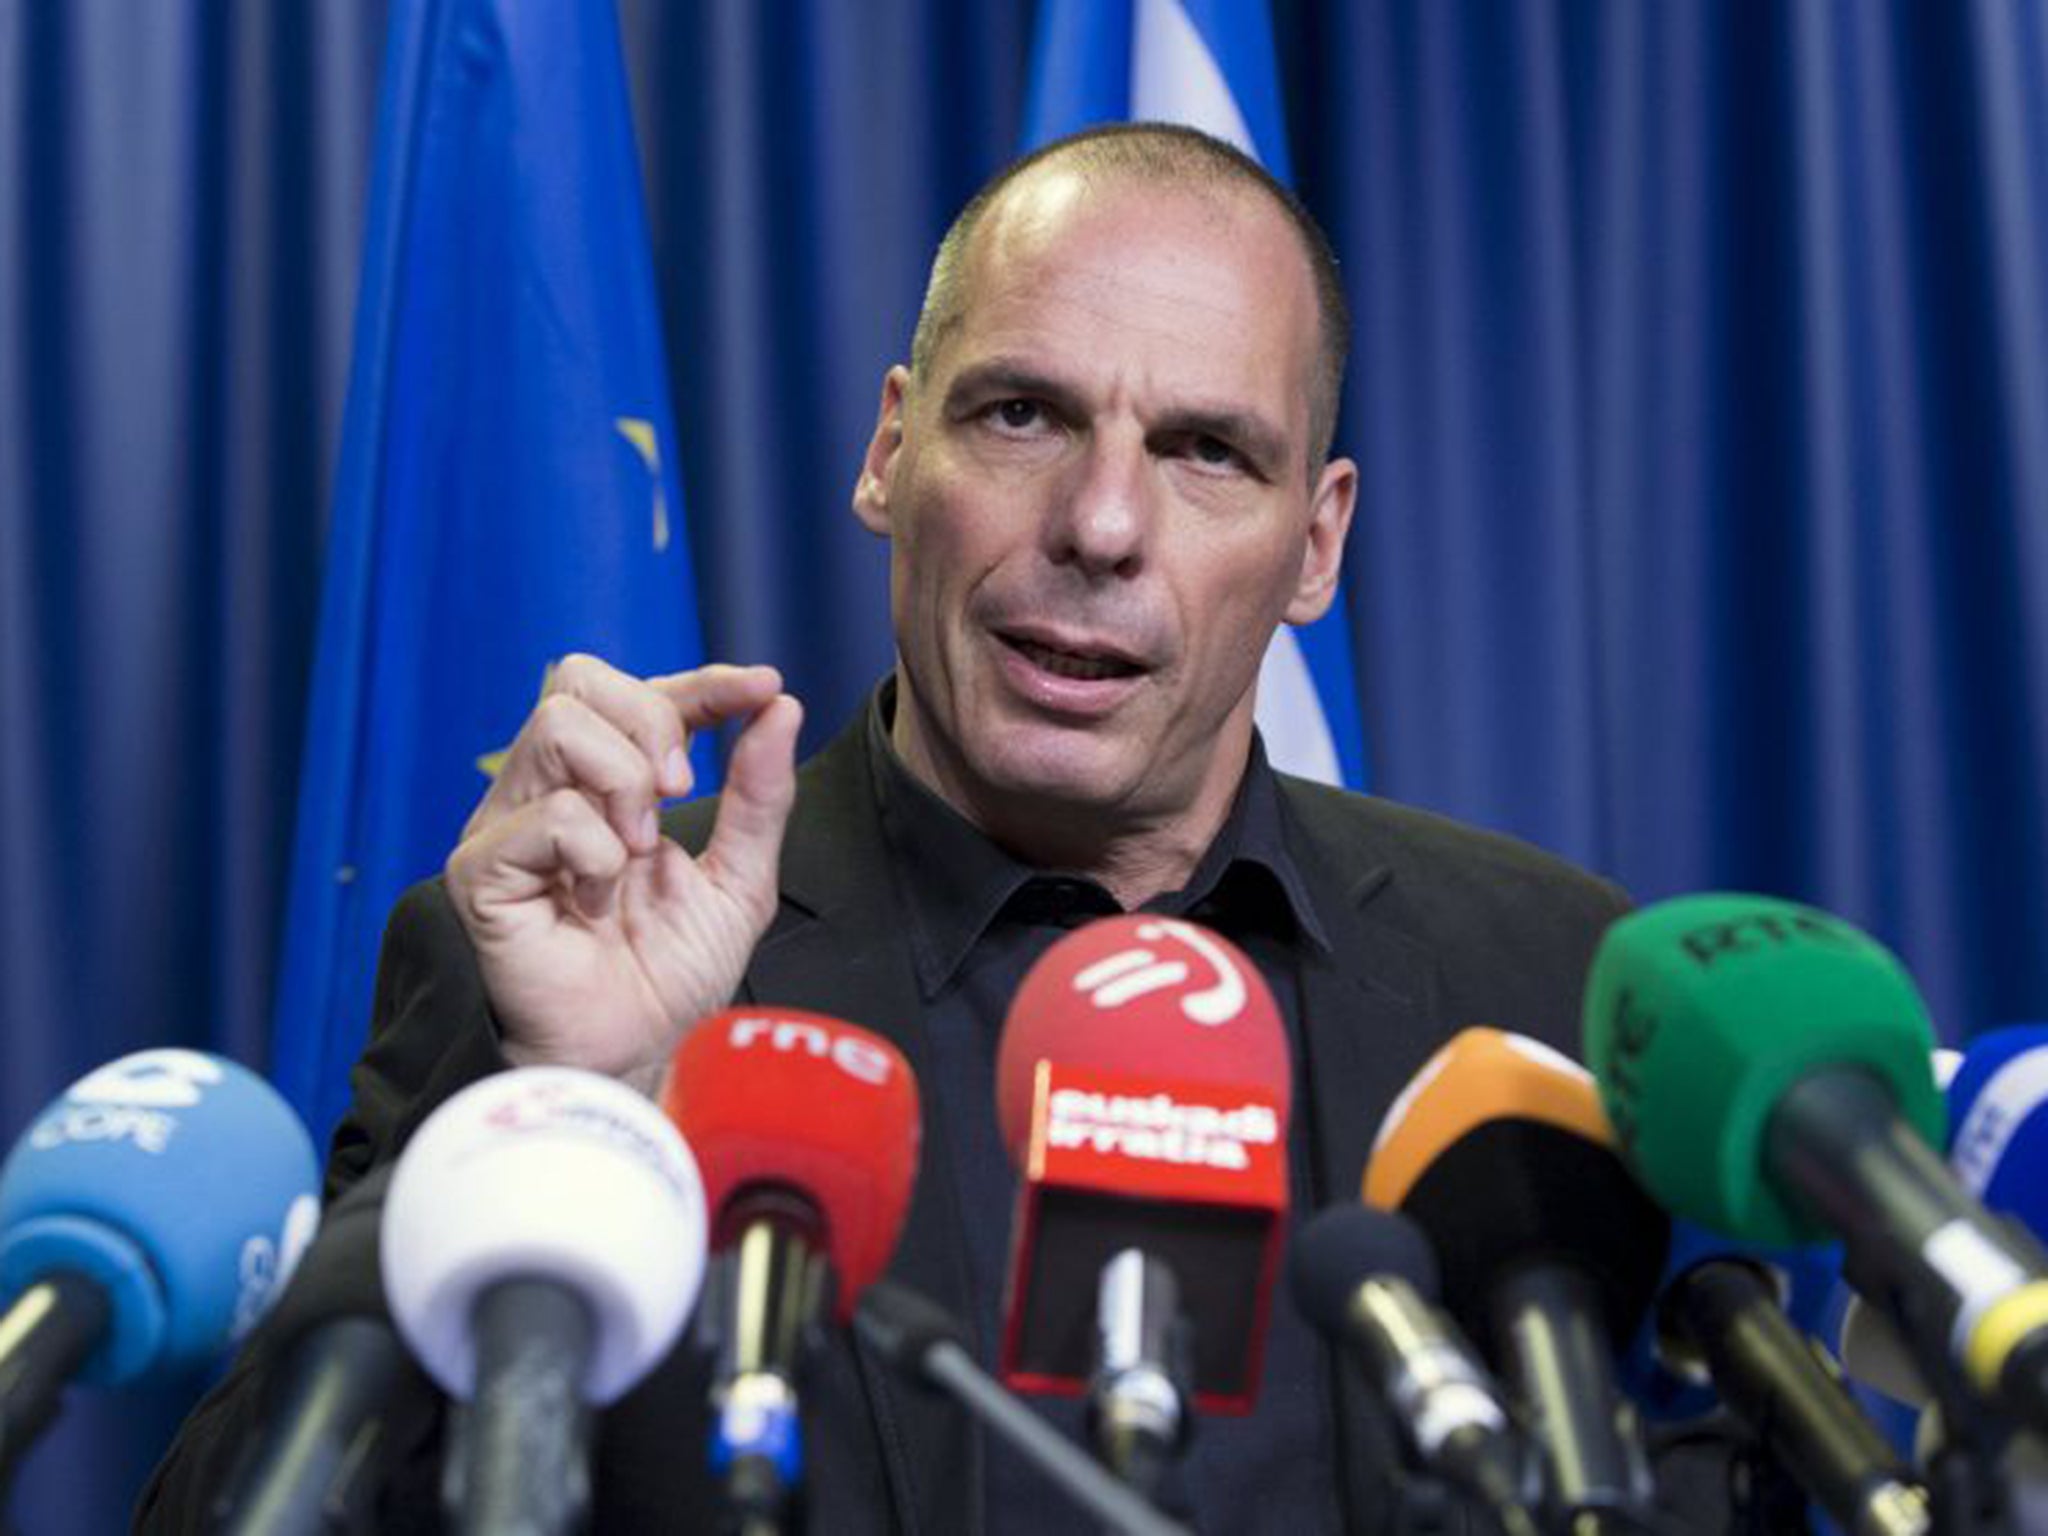 Greek Finance minister Yanis Varoufakis has pledged to resign if his country votes “yes” to the bailout plan